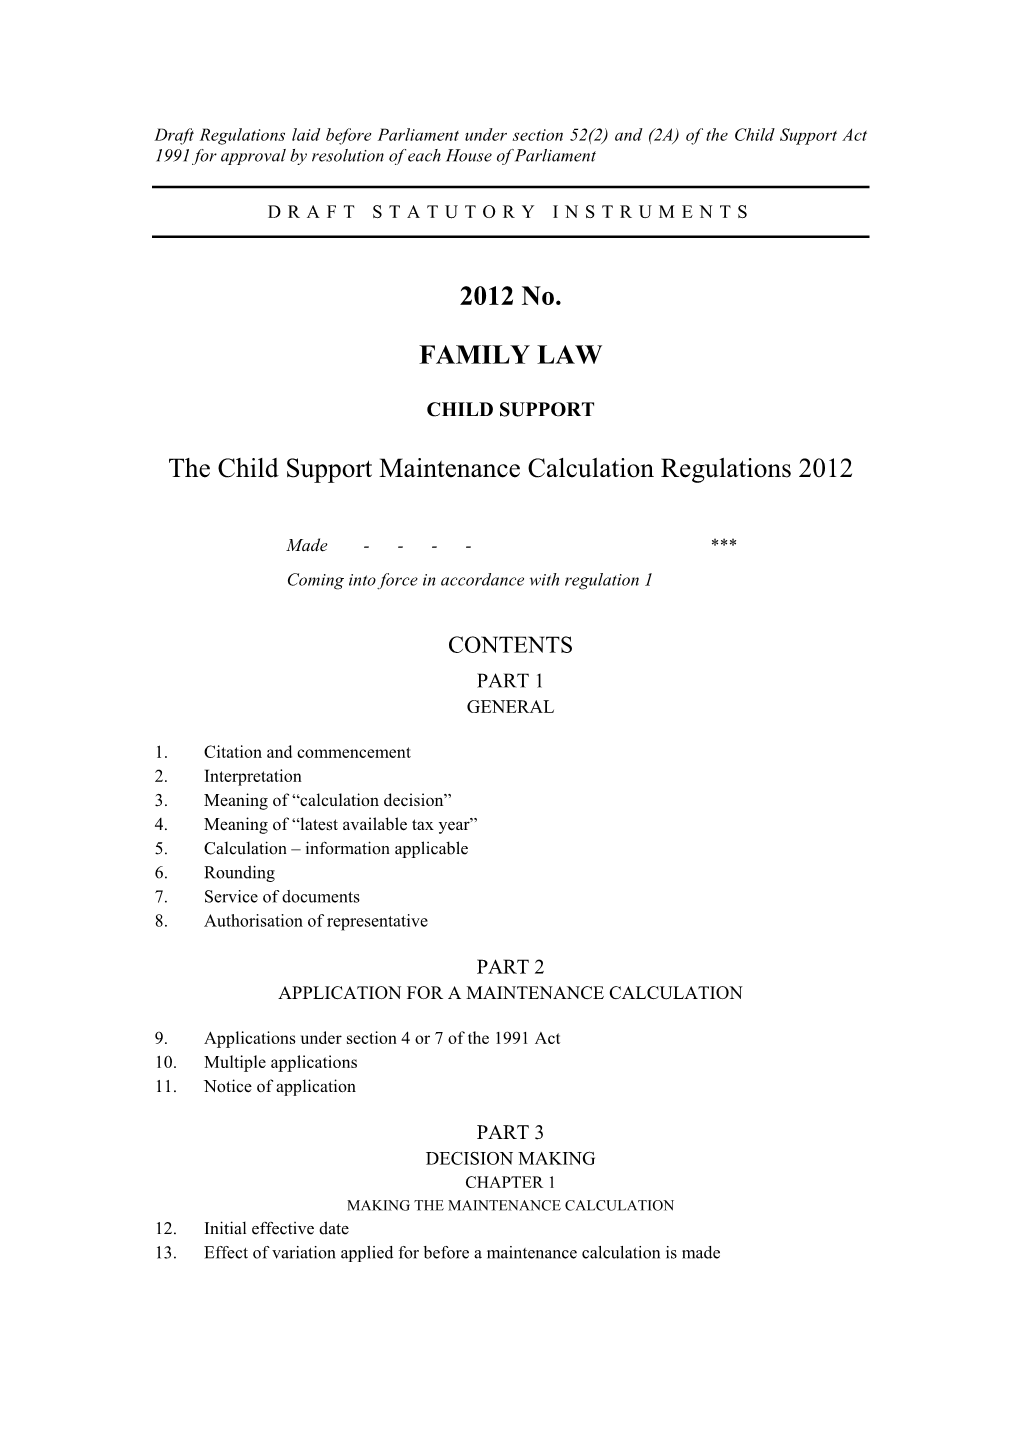 The Child Support Maintenance Calculation Regs 2012